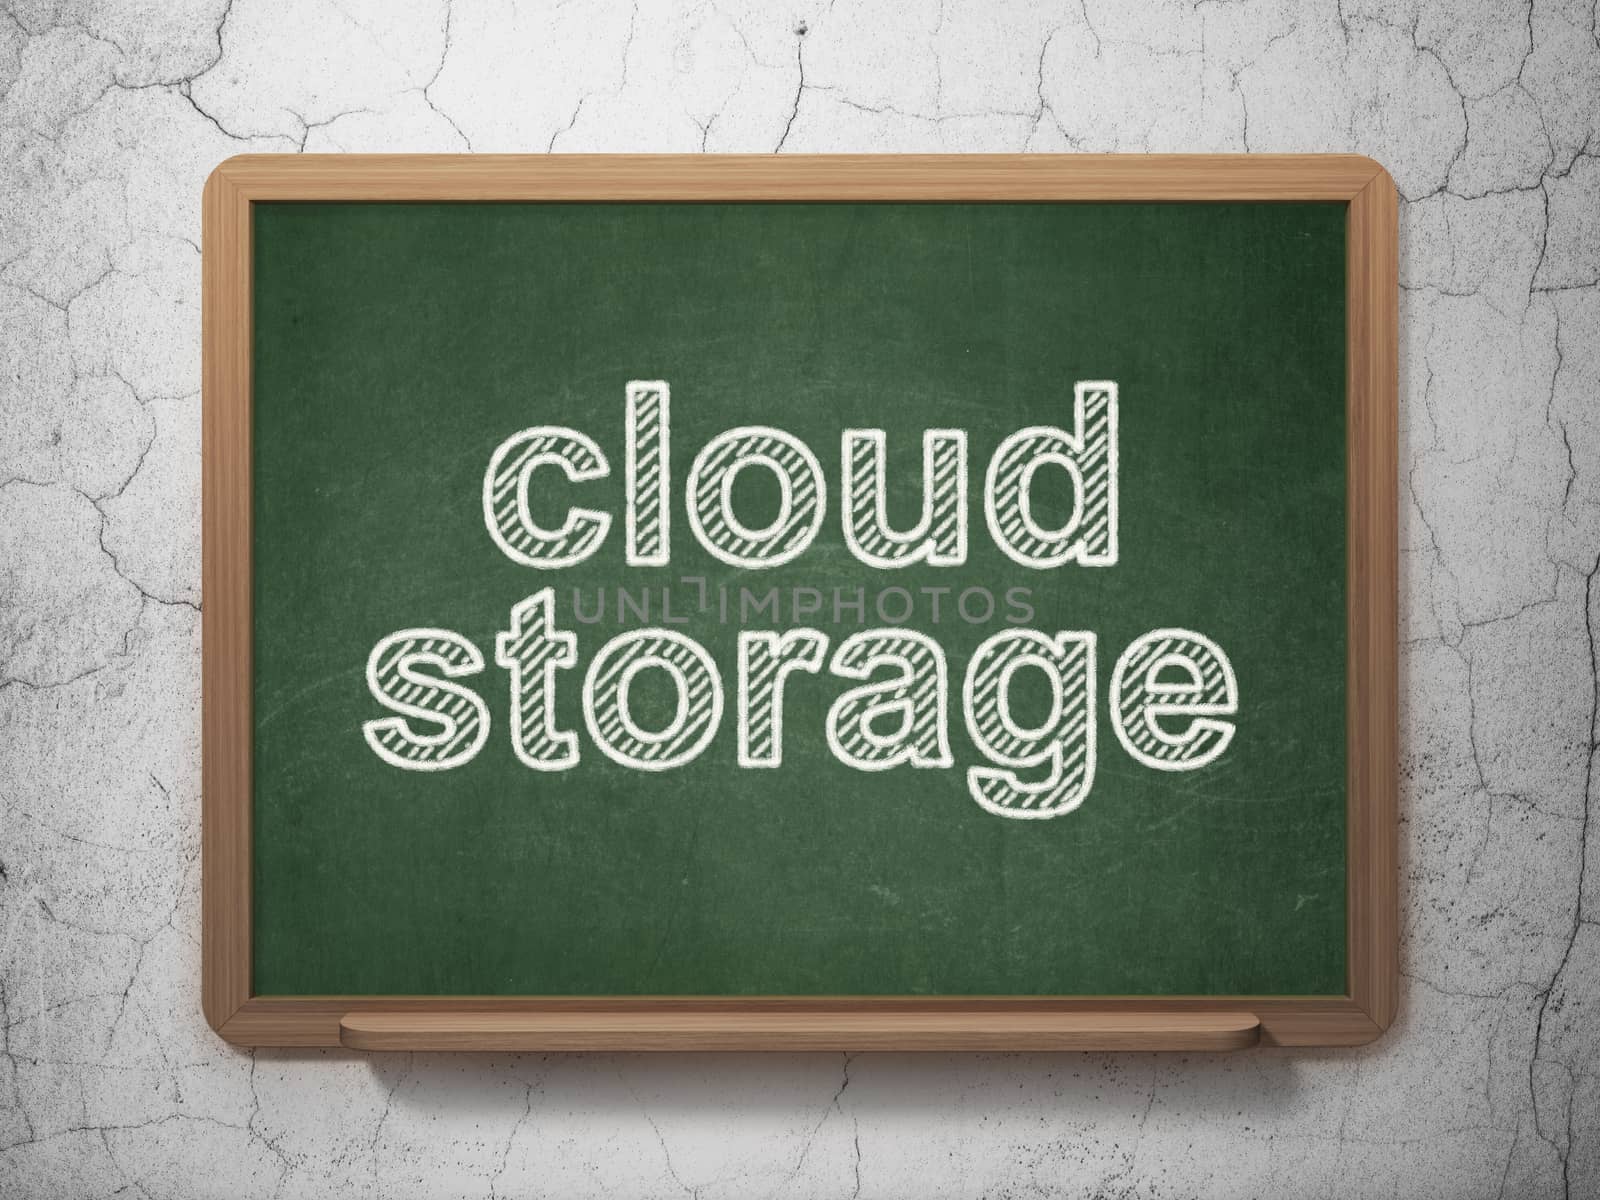 Protection concept: Cloud Storage on chalkboard background by maxkabakov